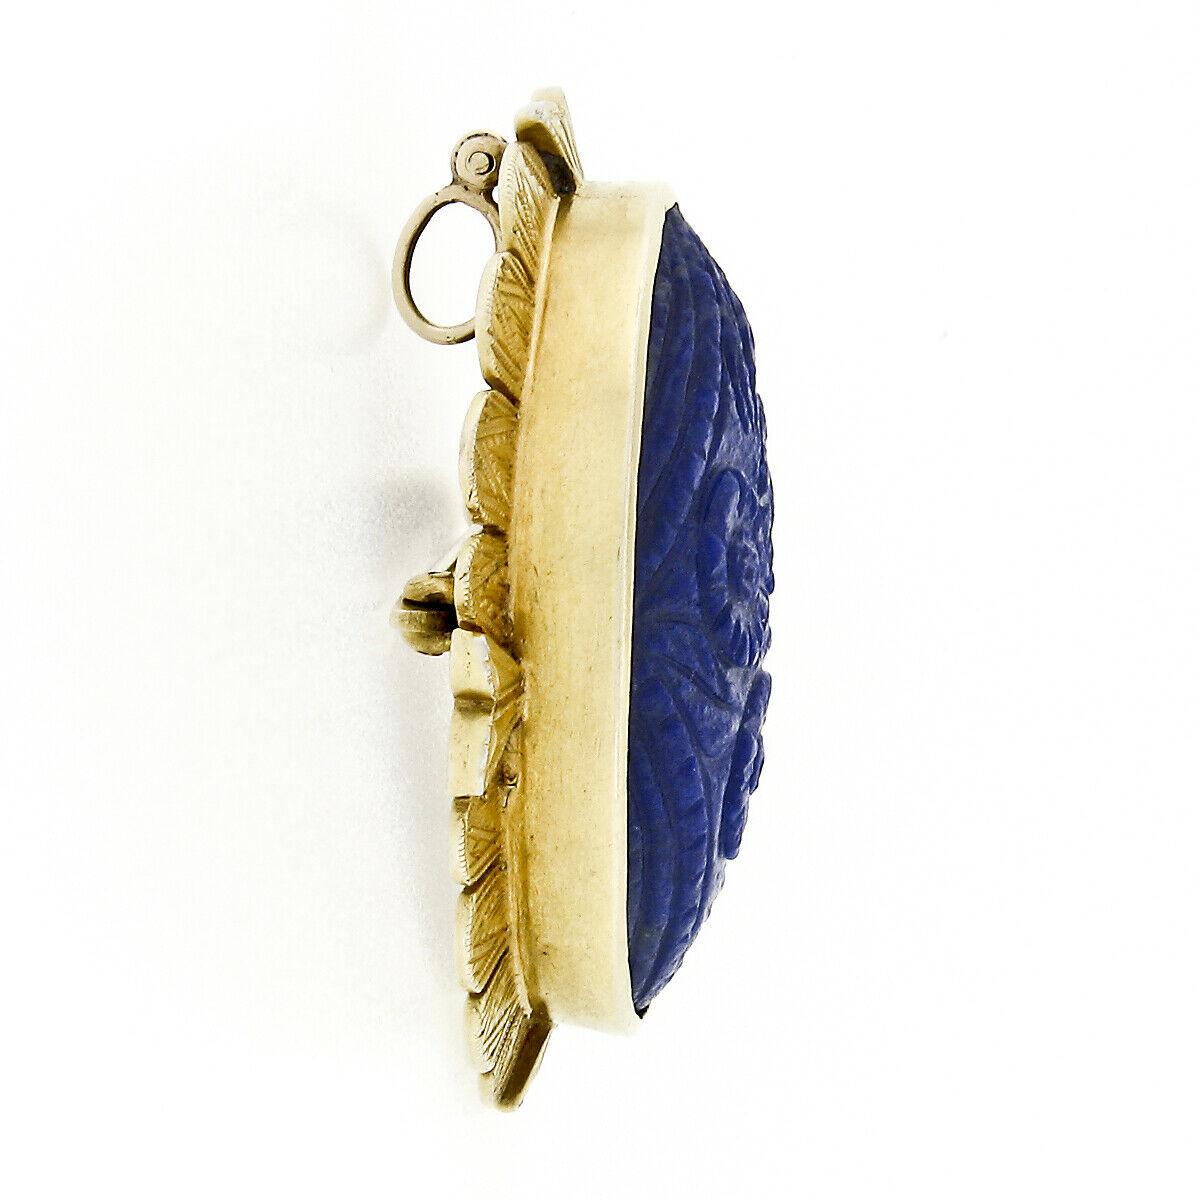 Oval Cut Antique Etruscan Revival 14k Gold GIA Carved Oval Blue Lapis Pendant or Brooch For Sale